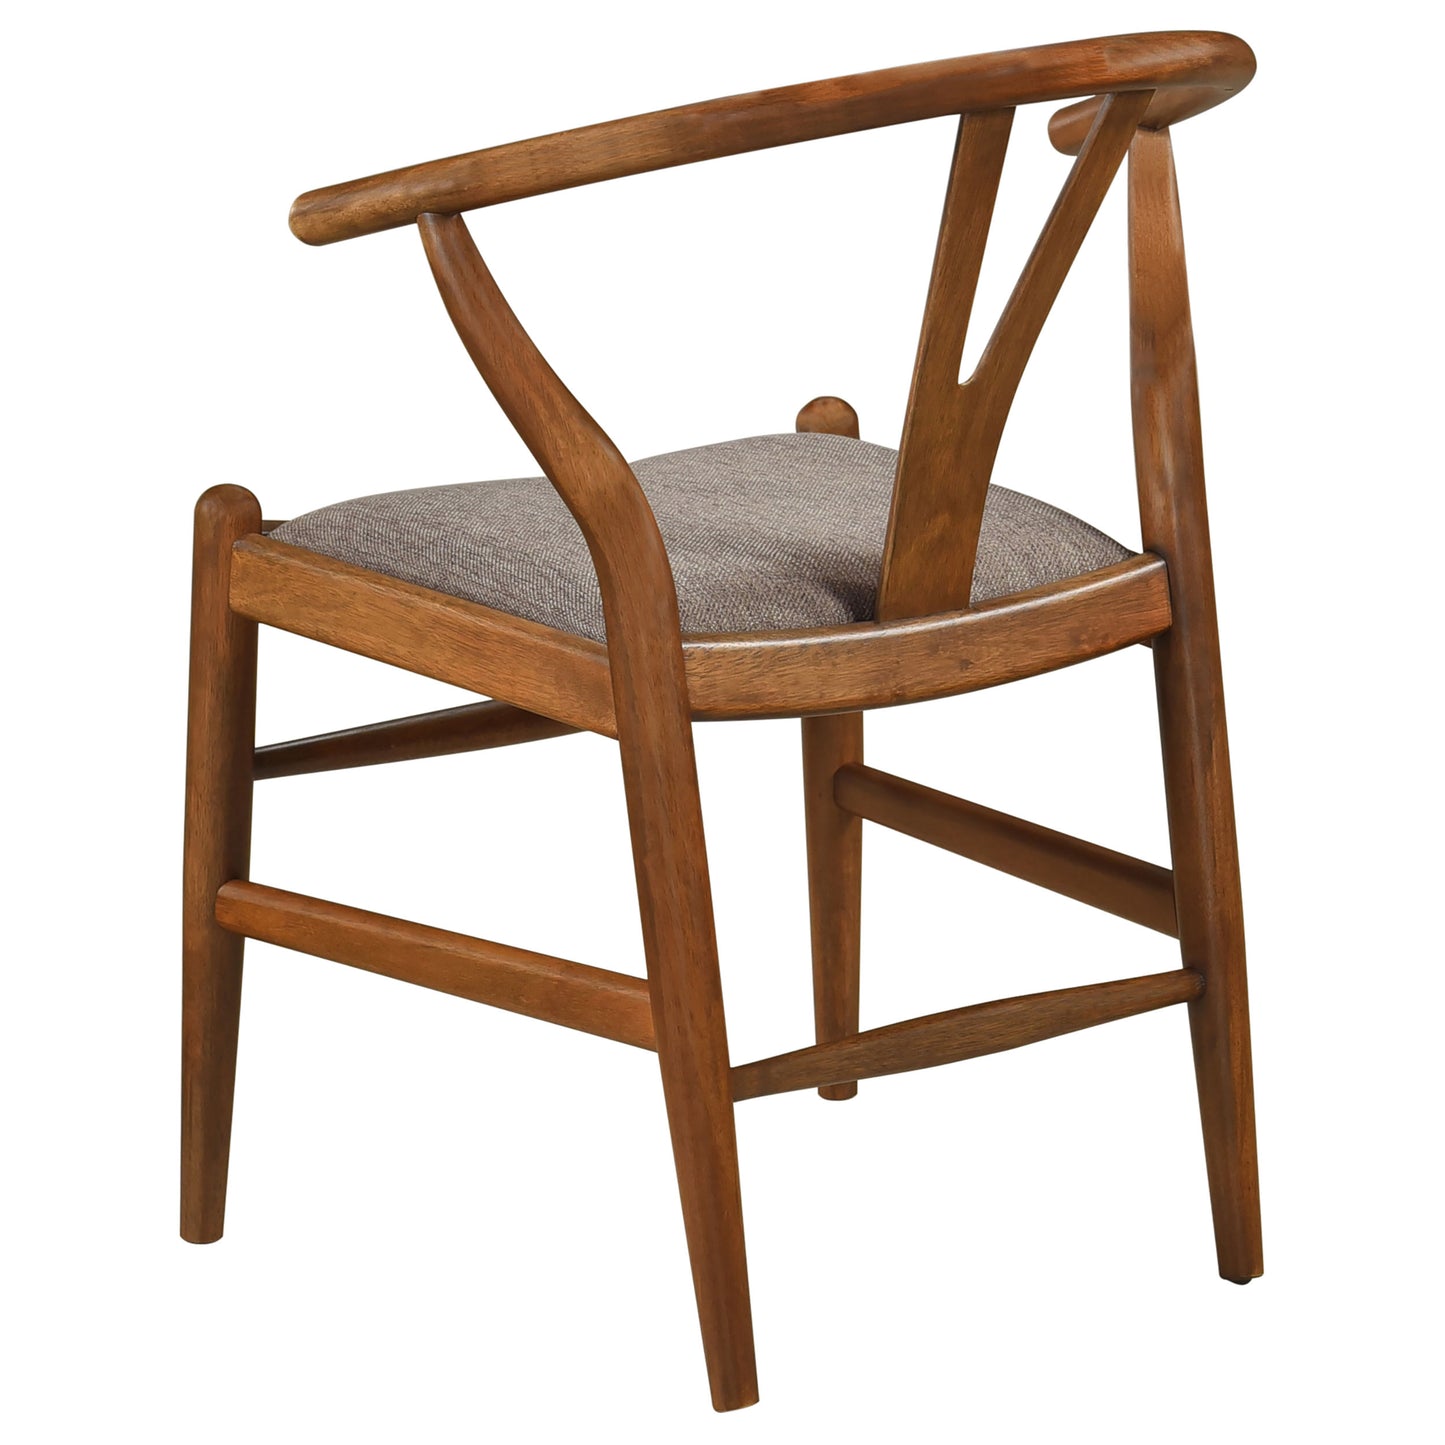 Dinah Danish Y-Shaped Back Wishbone Dining Side Chair Walnut and Brown (Set of 2)